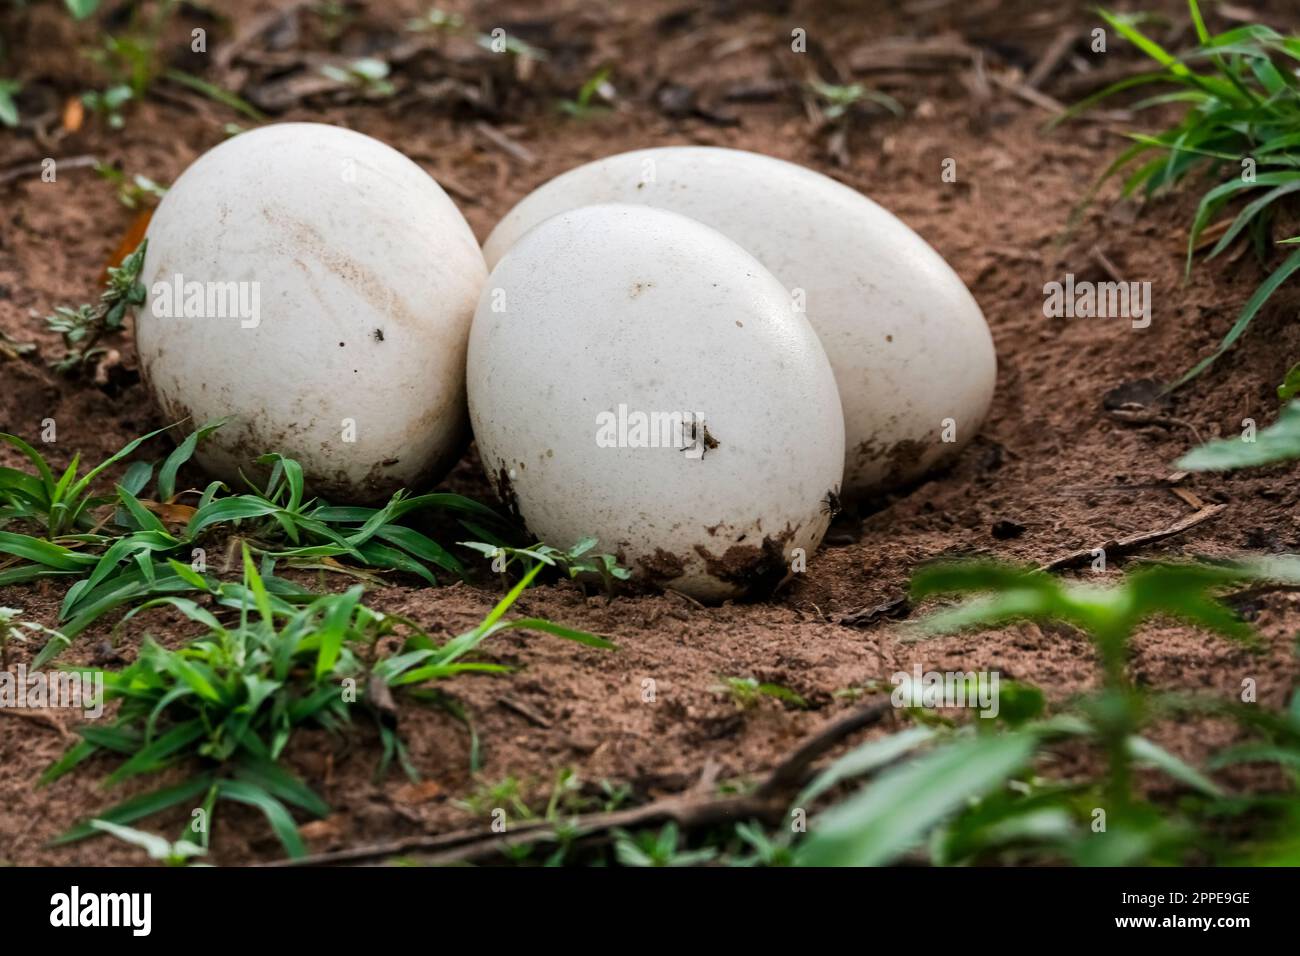 Close-up of three Nandu or Rhea eggs lying in its nest of soil in the grass, Pantanal Wetlands, Mato Grosso, Brazil Stock Photo